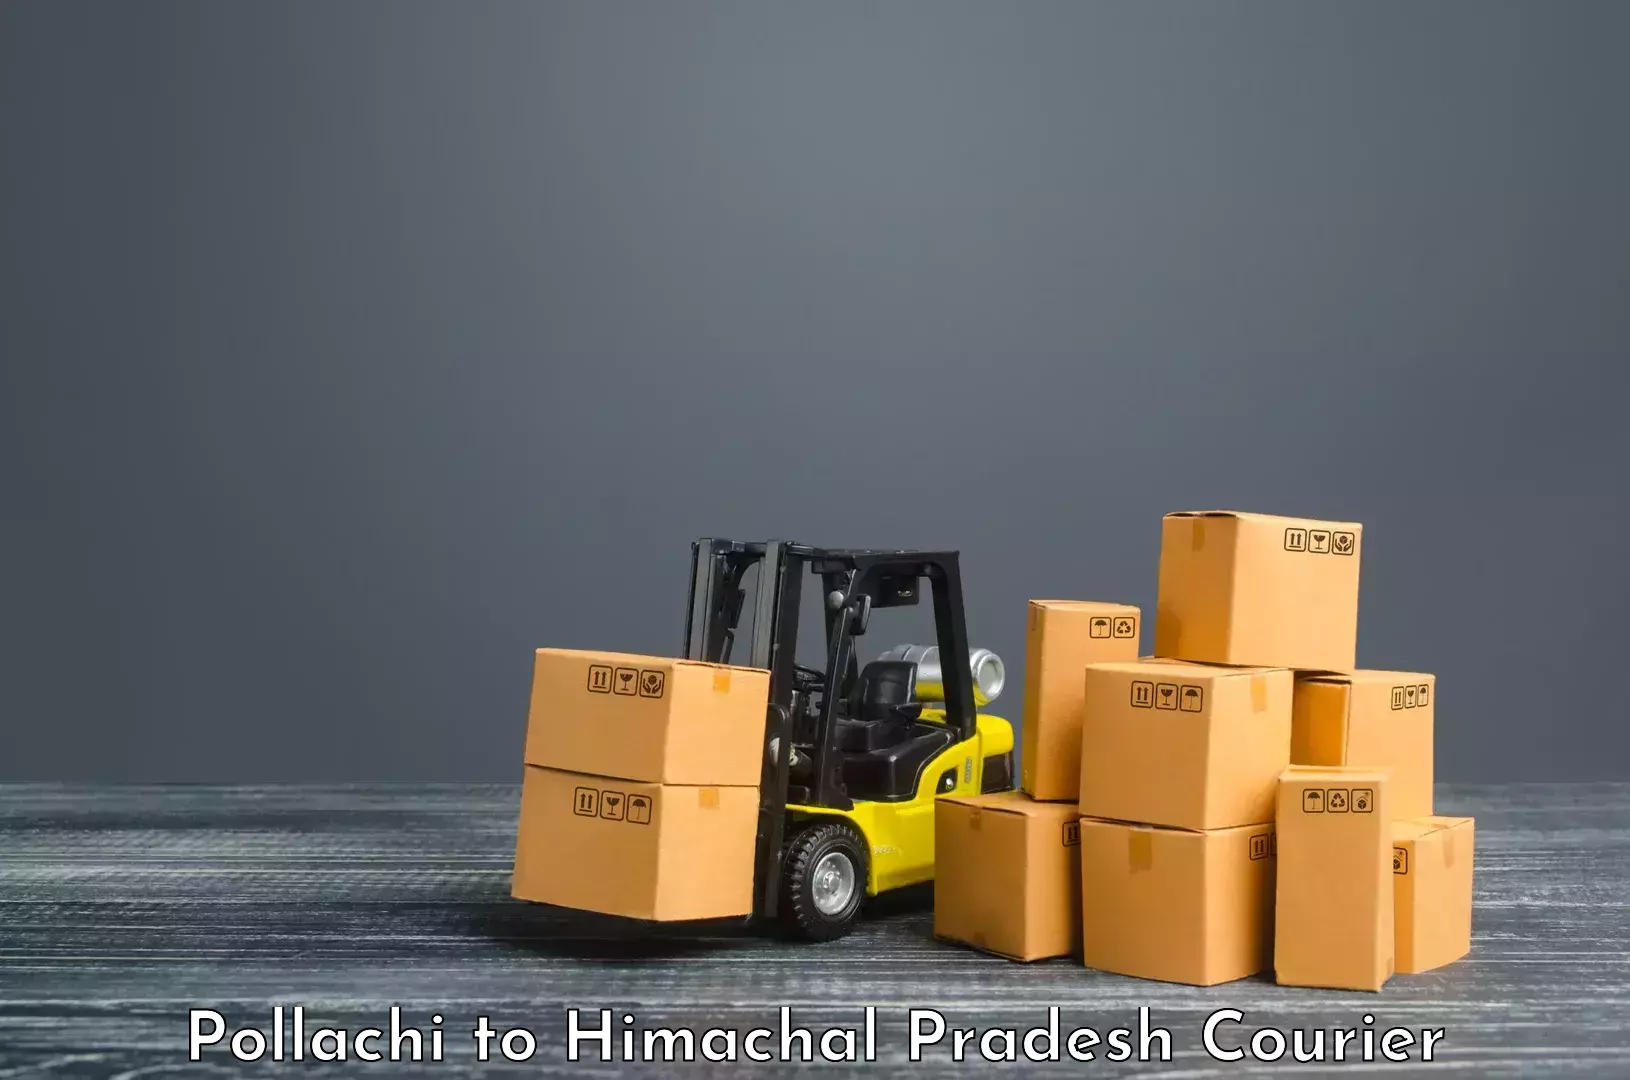 Reliable shipping partners Pollachi to Himachal Pradesh